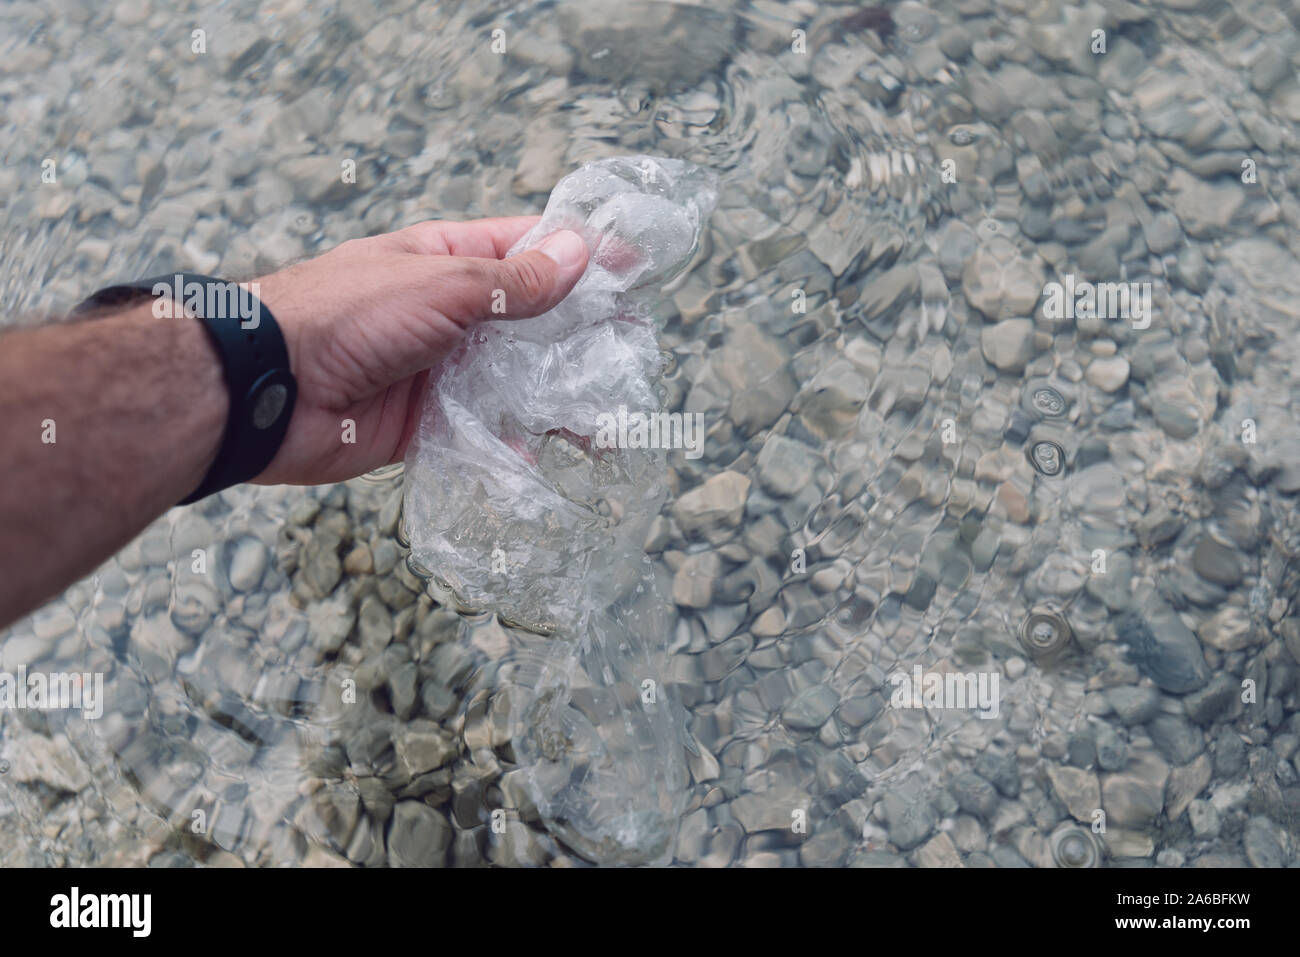 Environmentalist taking plastic bag from water, close up of hand Stock Photo